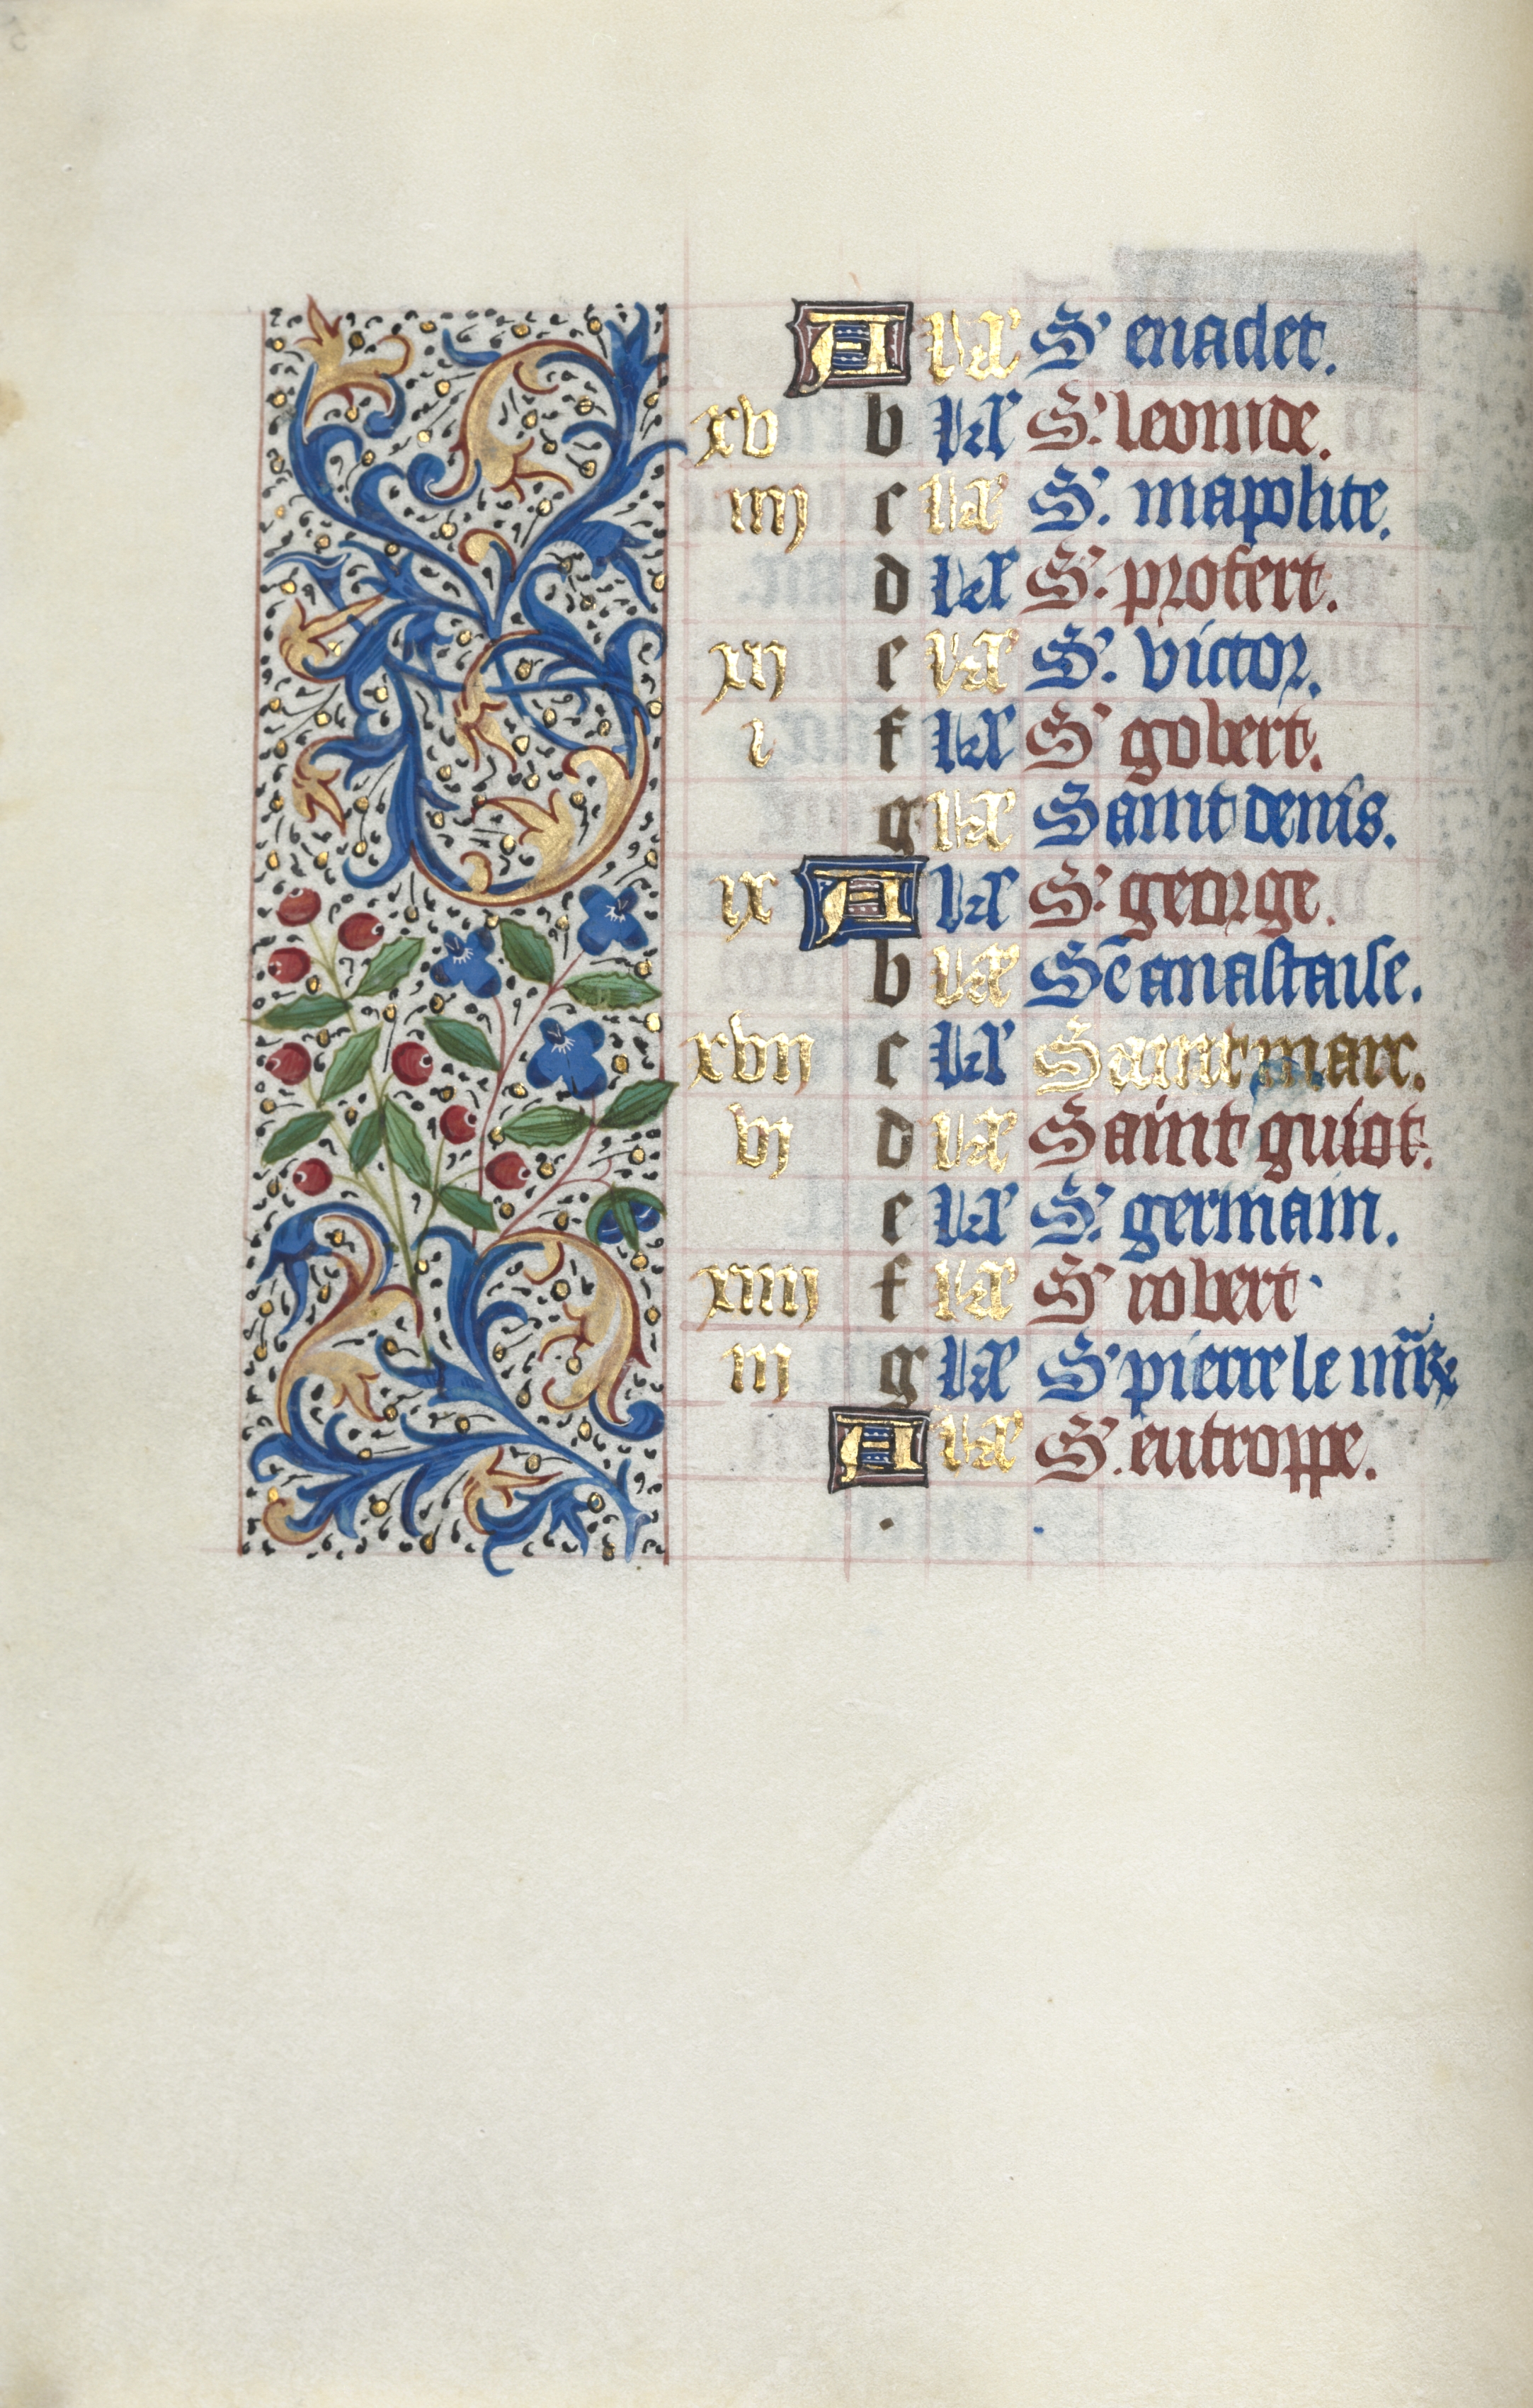 Book of Hours (Use of Rouen): fol. 4v